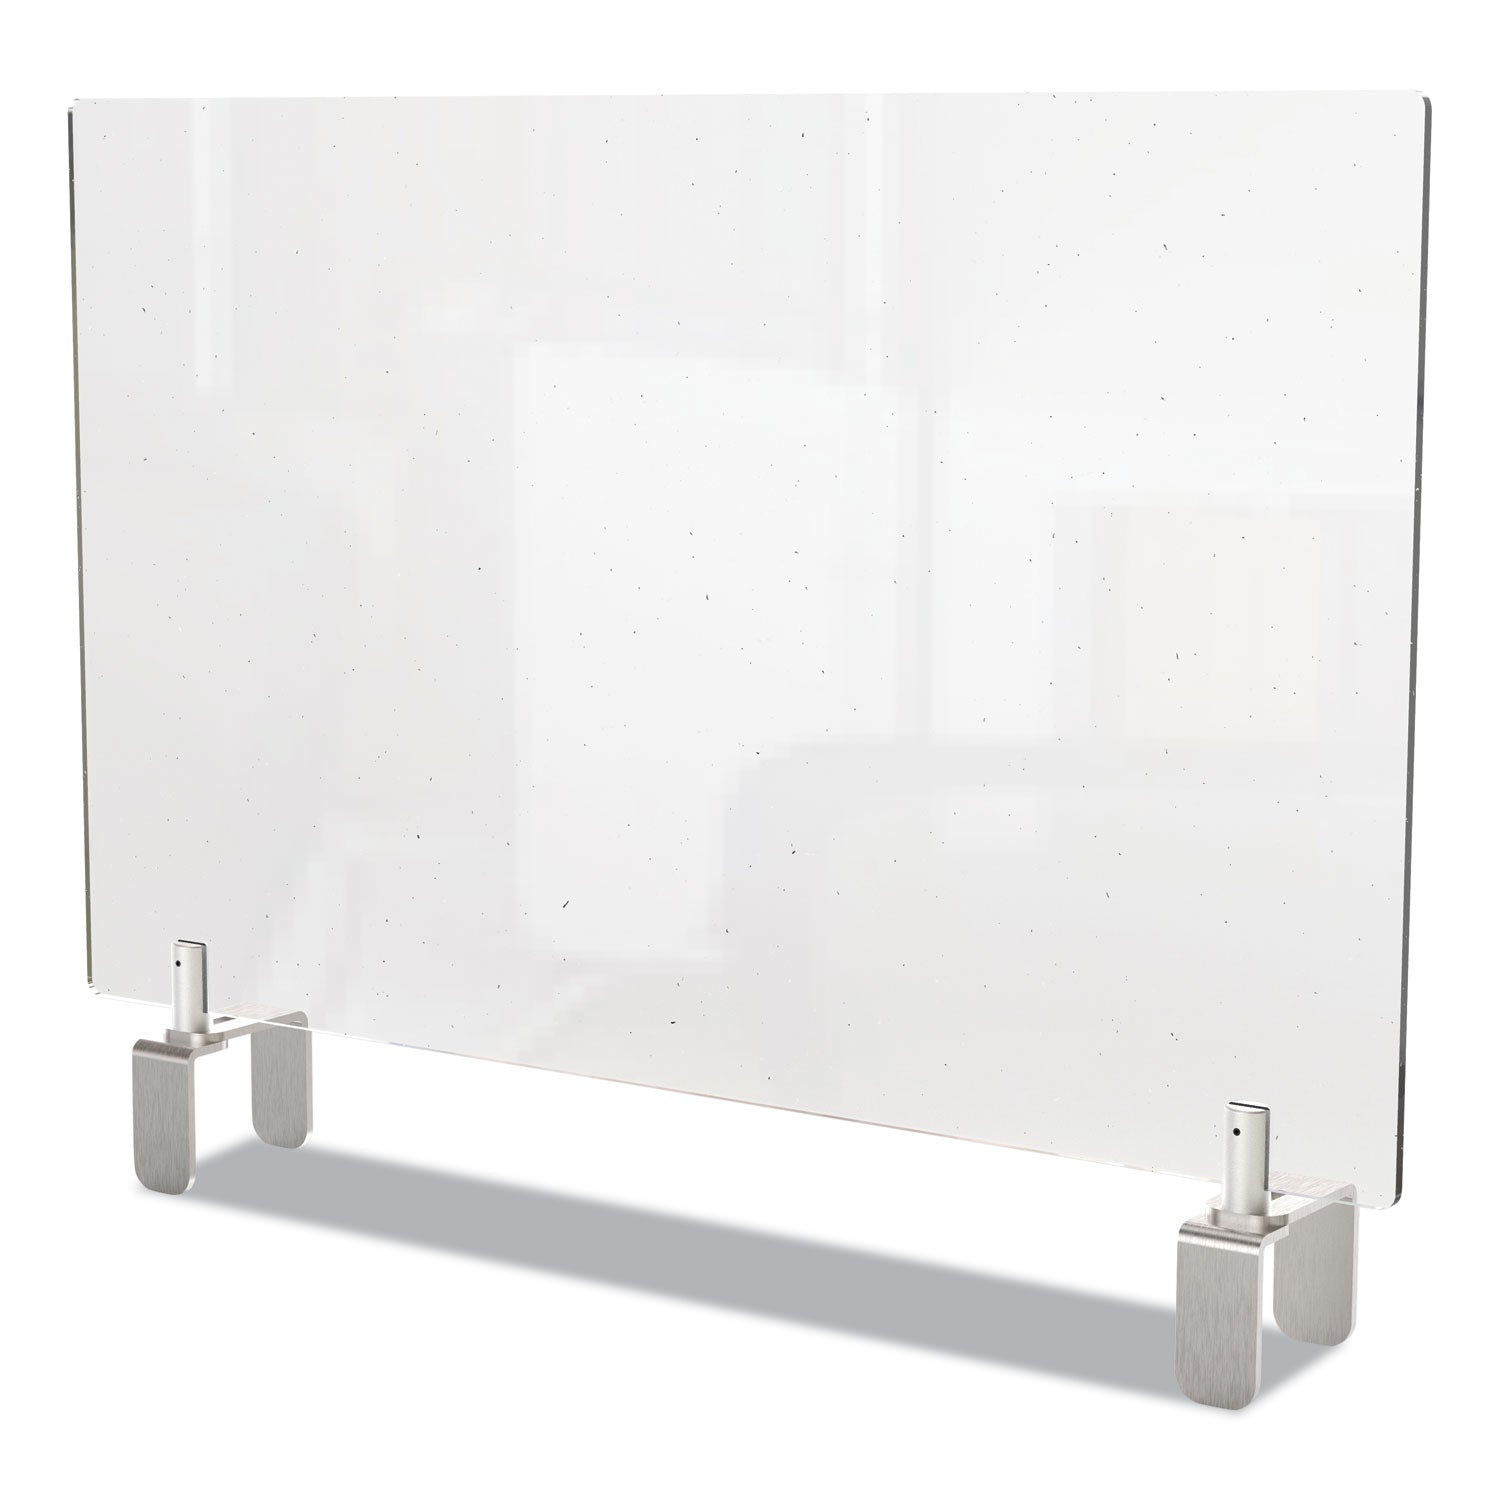 Clear Partition Extender with Attached Clamp, 42 x 3.88 x 30, Thermoplastic Sheeting Flipcost Flipcost